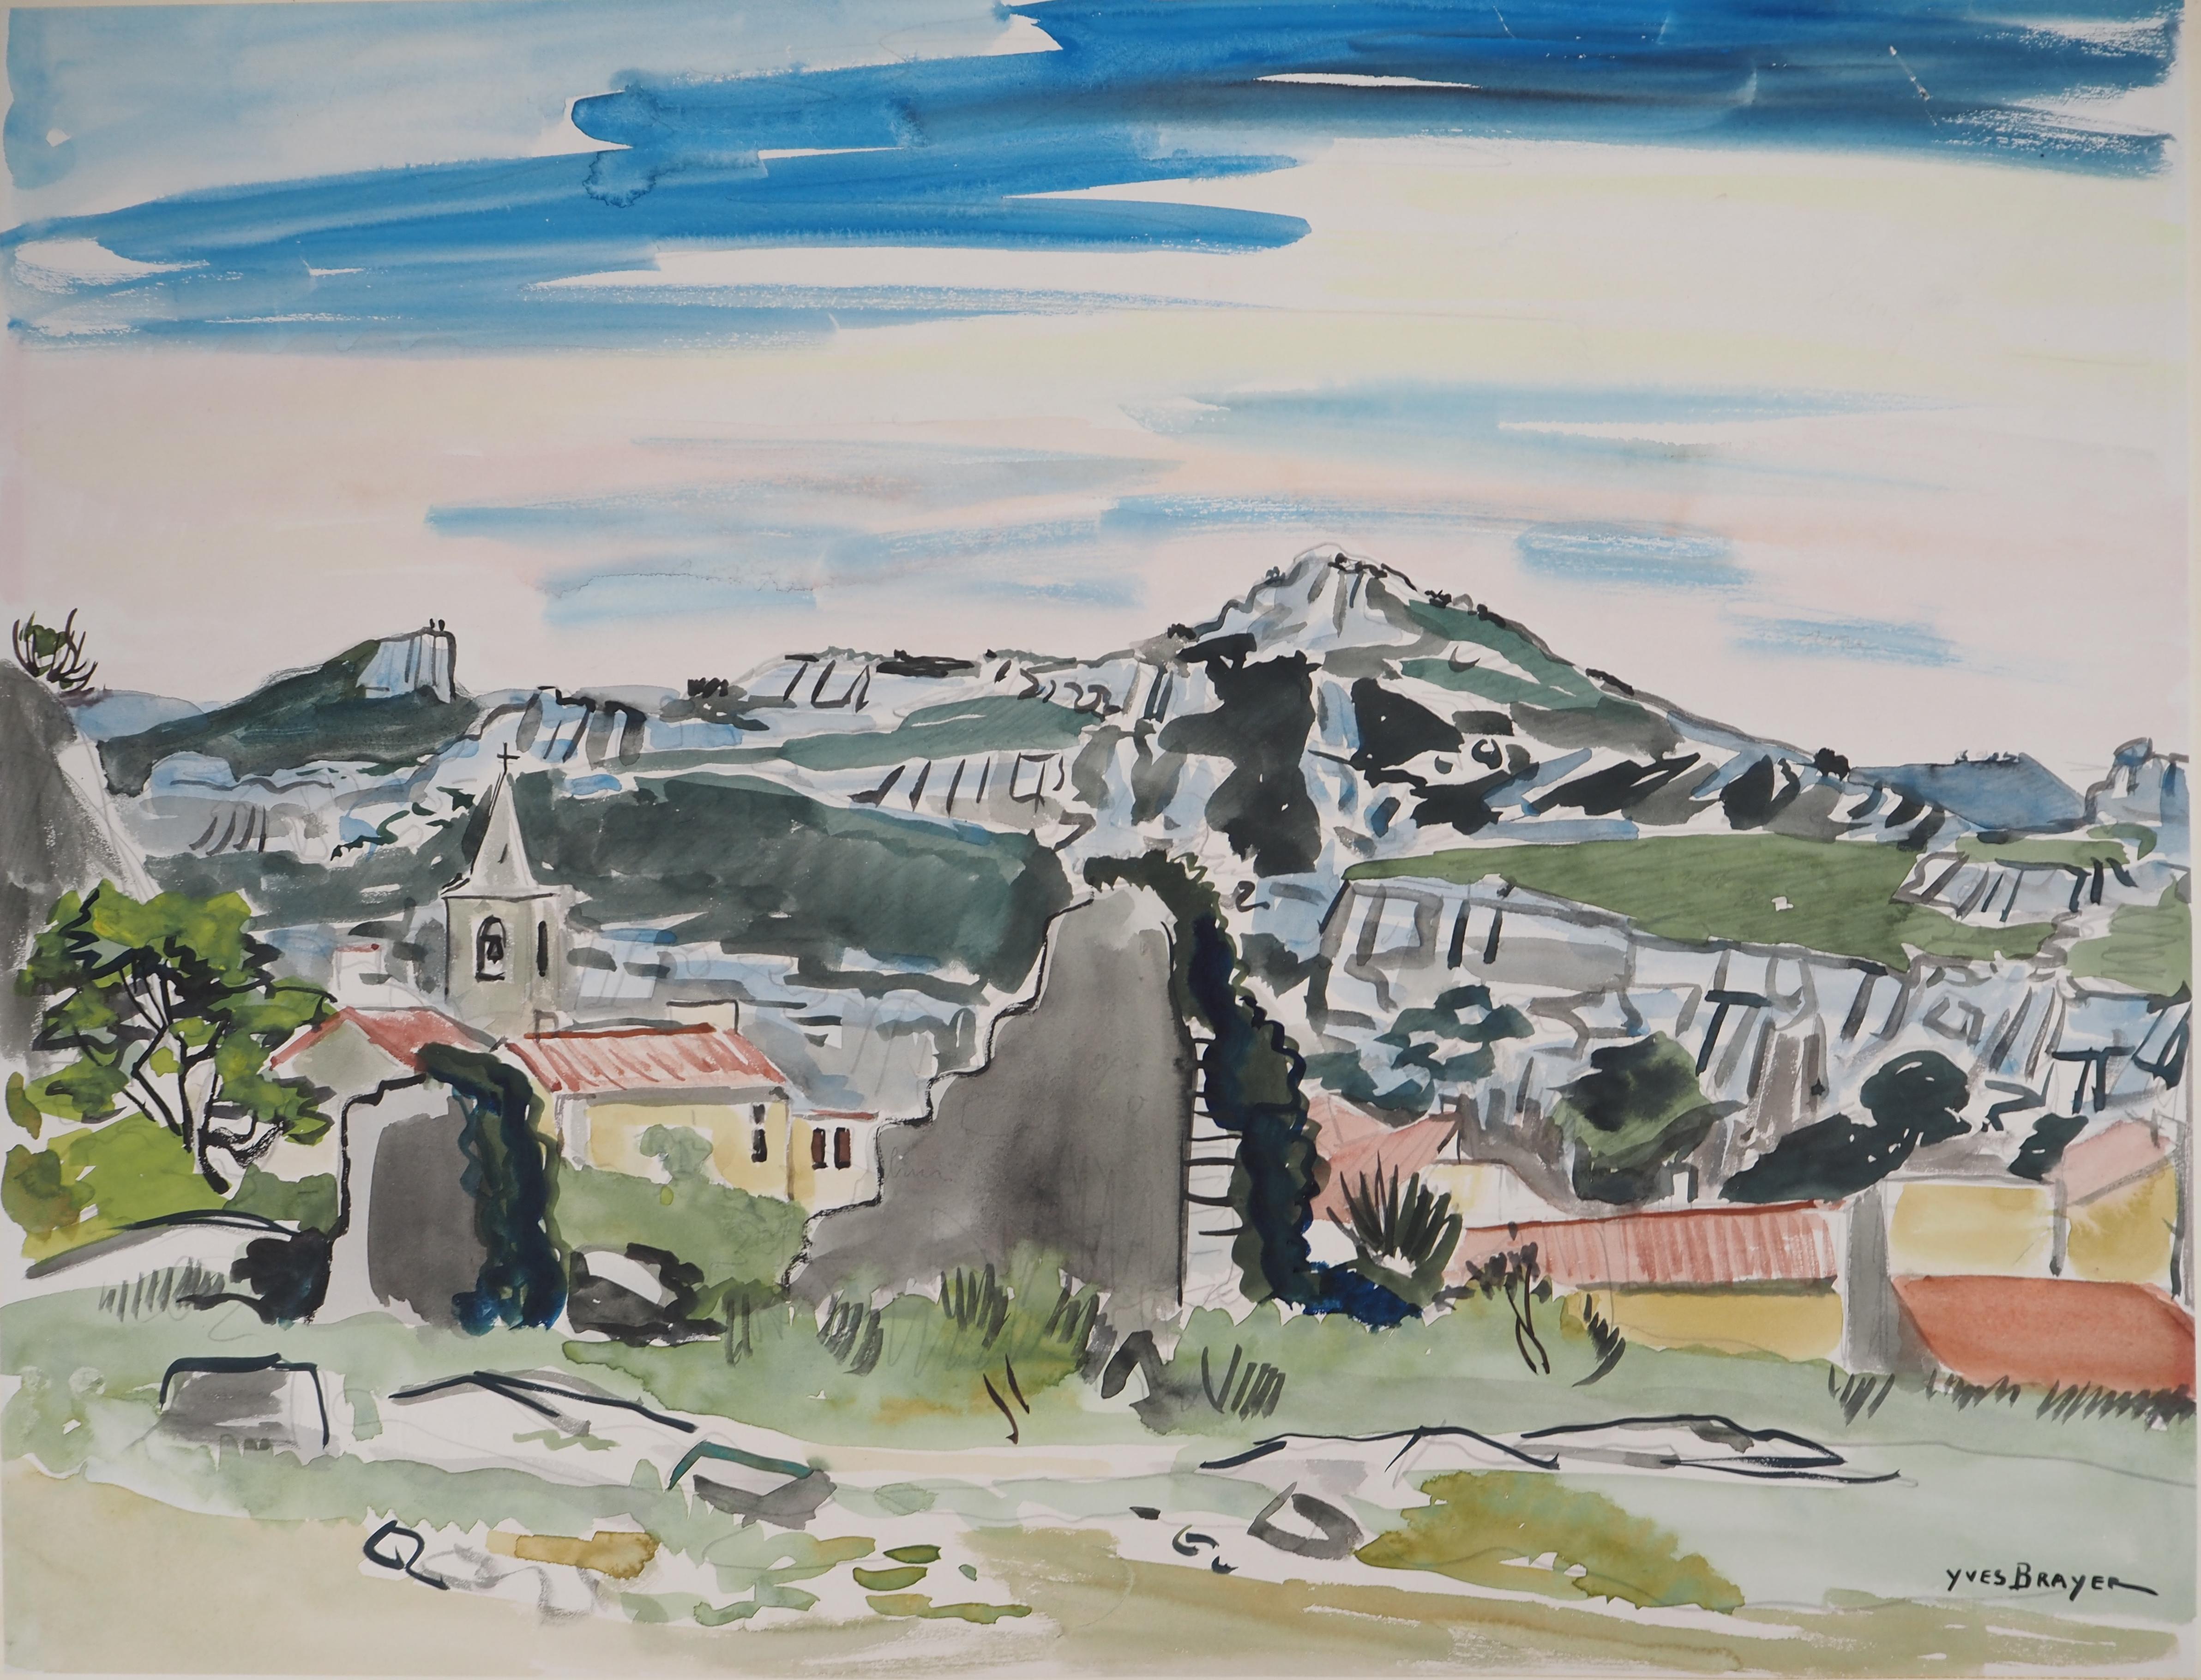 Yves Brayer Landscape Art - Provence : Small Village and Mountains - Original Watercolor, Handsigned